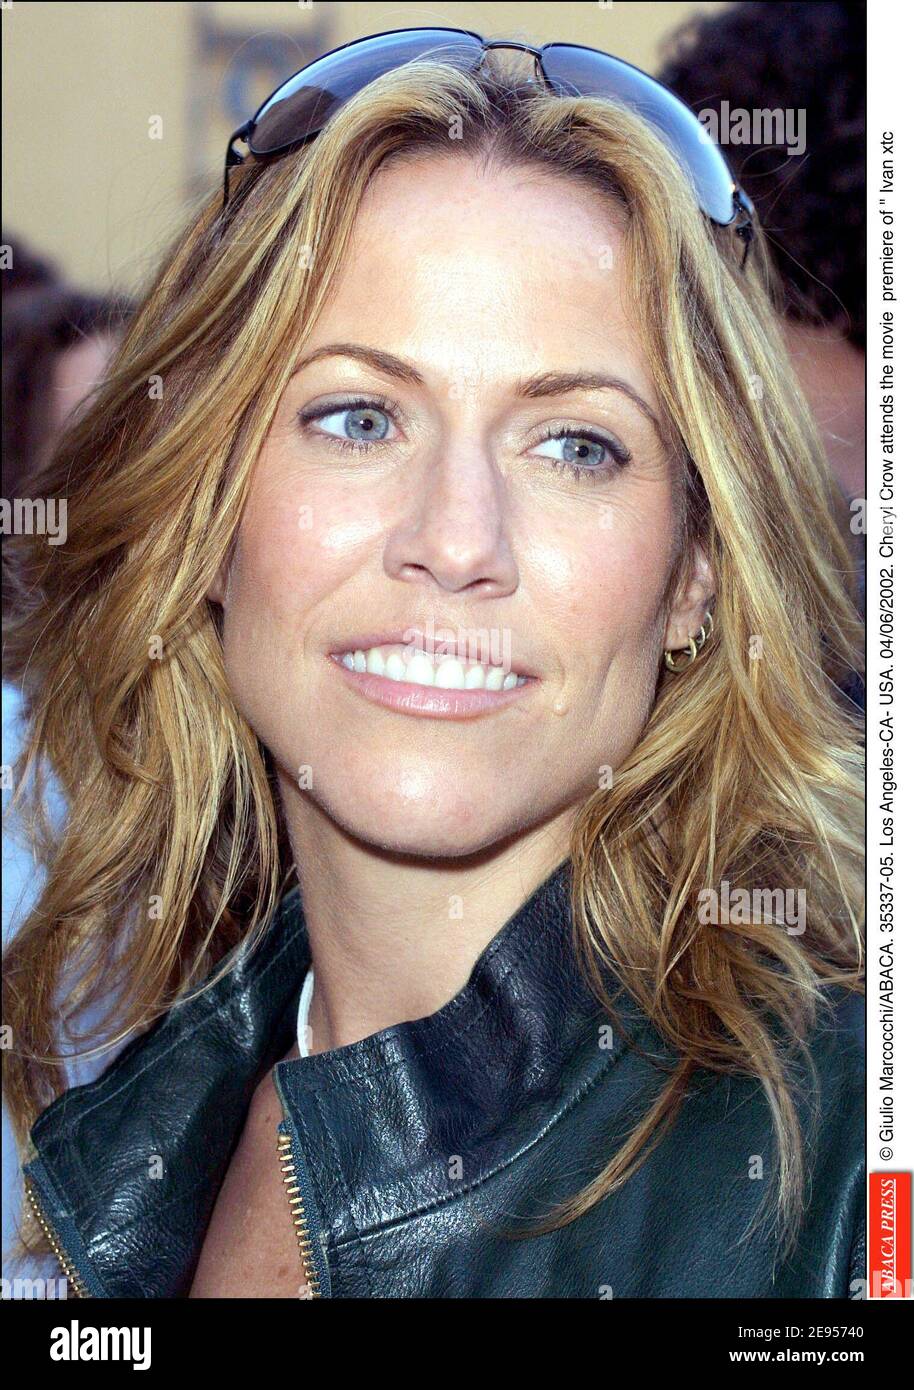 © Giulio Marcocchi/ABACA. 35337-05. Los Angeles-CA- USA. 04/06/2002. Cheryl Crow attends the movie premiere of Ivan xtc Stock Photo